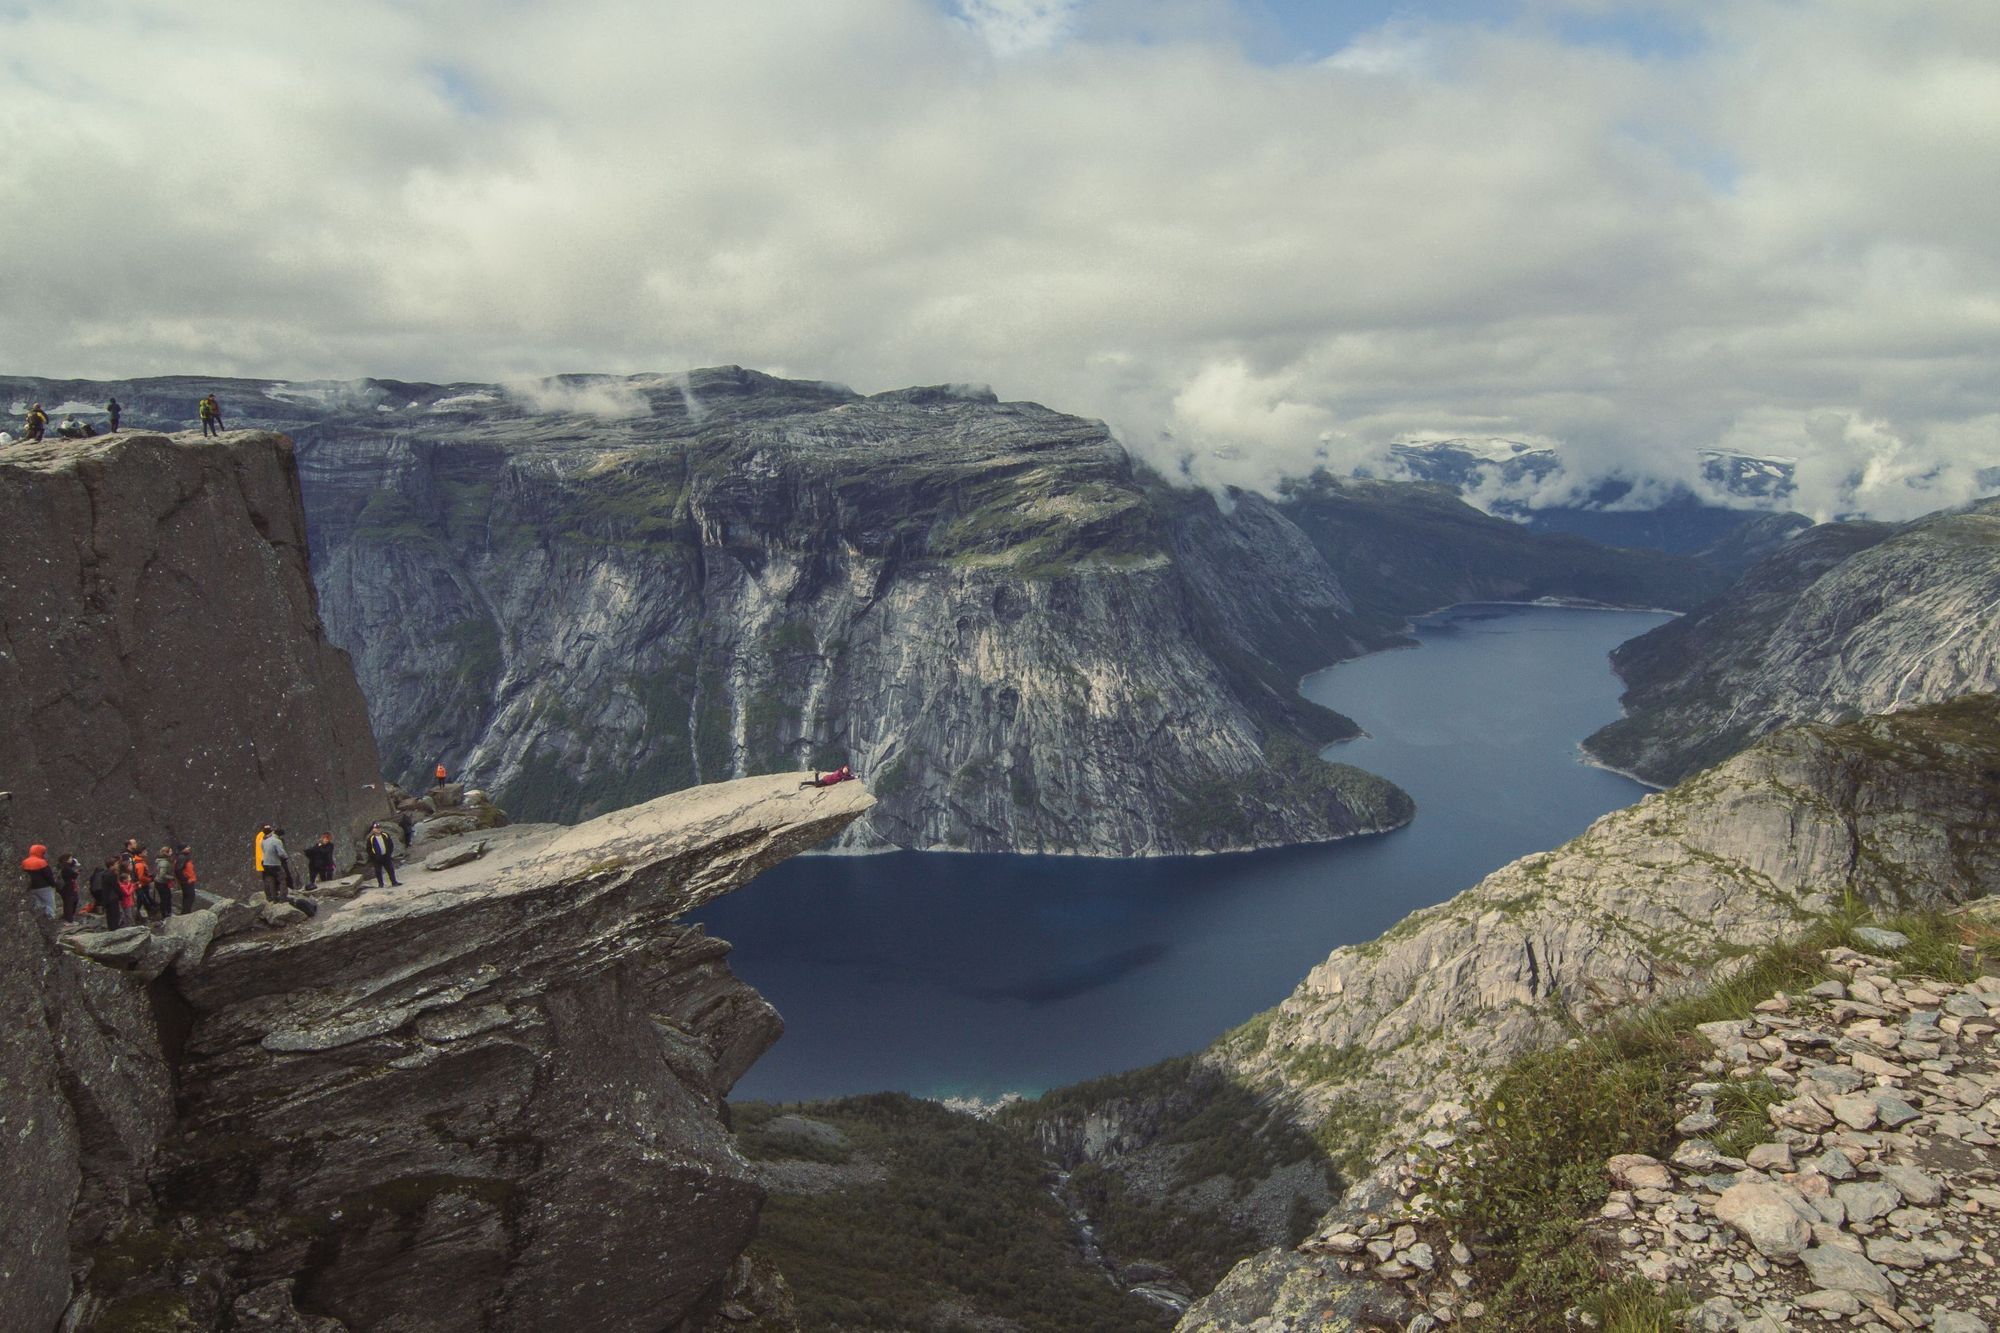 Hikers queue on the Trolltunga rock in Norway, waiting for their chance to take a photo alone on the rock. Photo: Getty